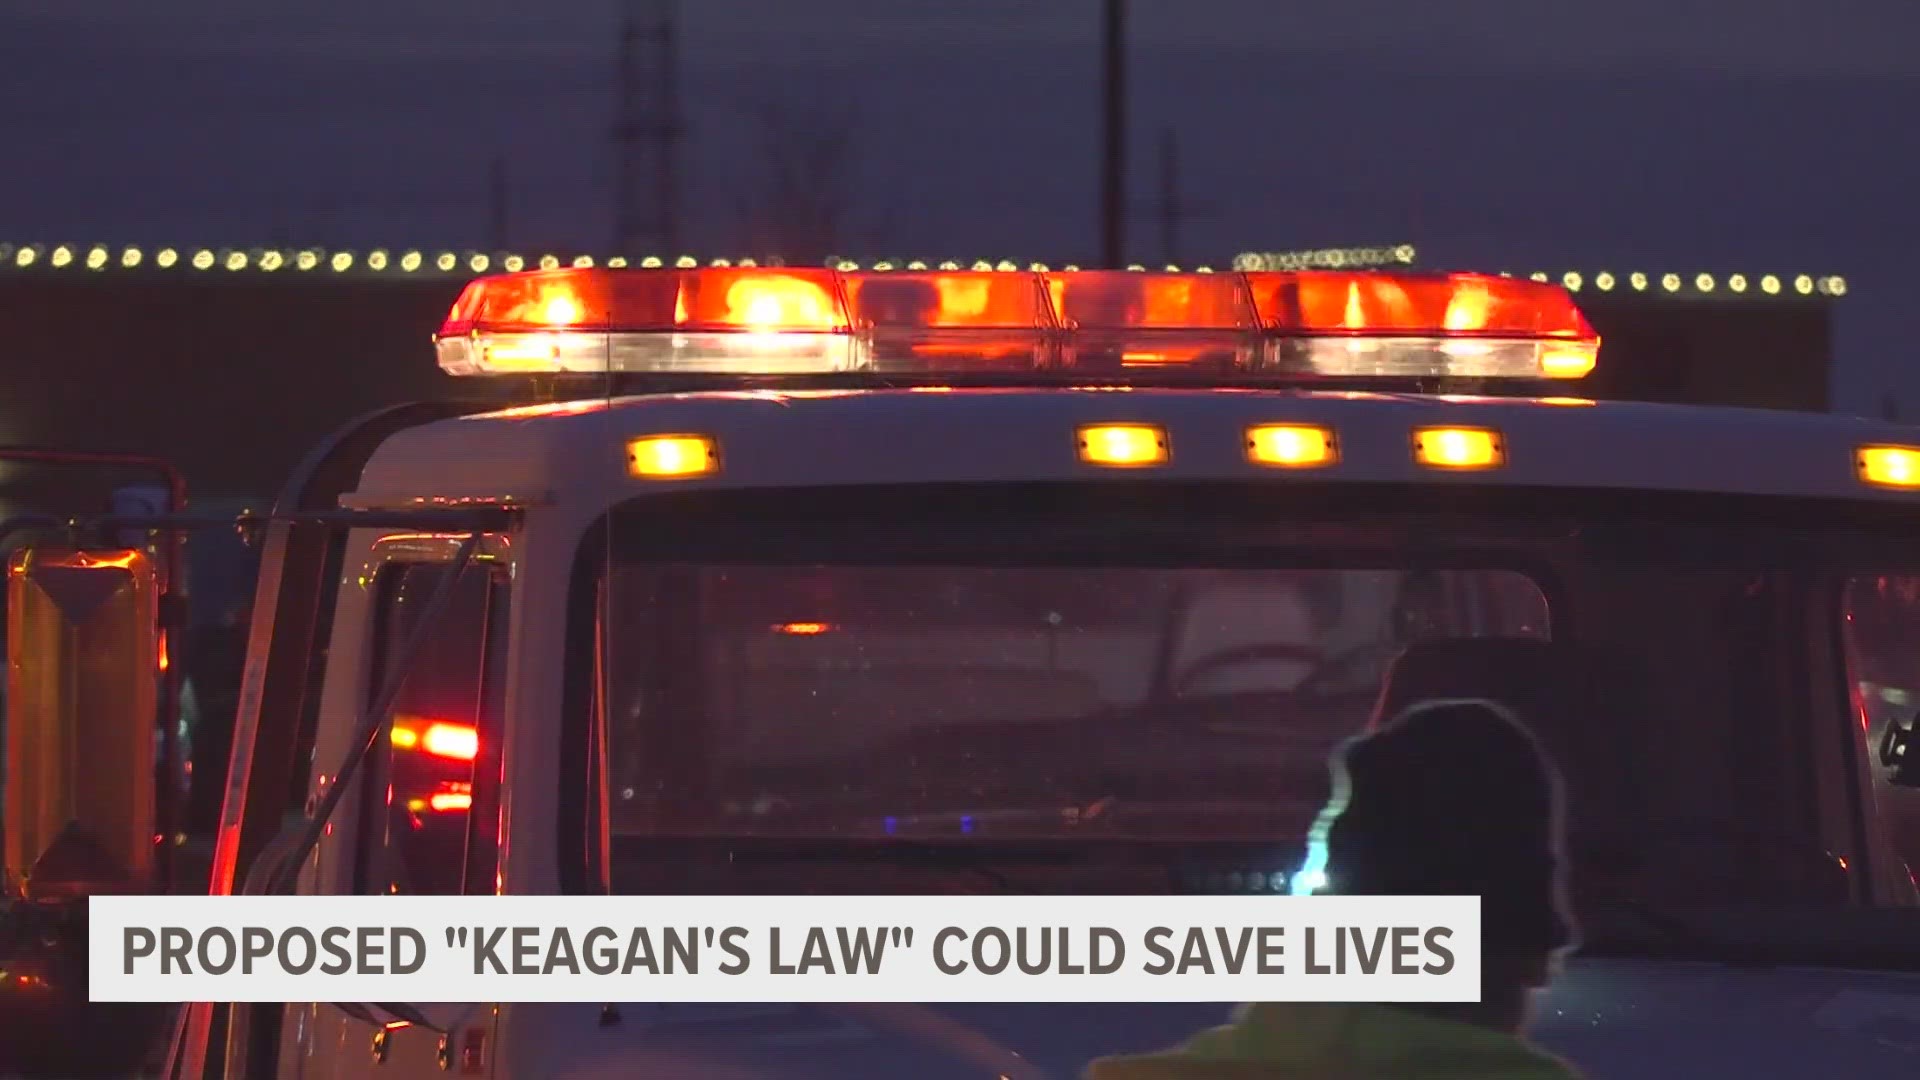 Keagan Spencer was a third generation tow truck driver from Hastings. A bill, nicknamed "Keagan's Law", hopes to put blue flashing lights on top of wreckers.